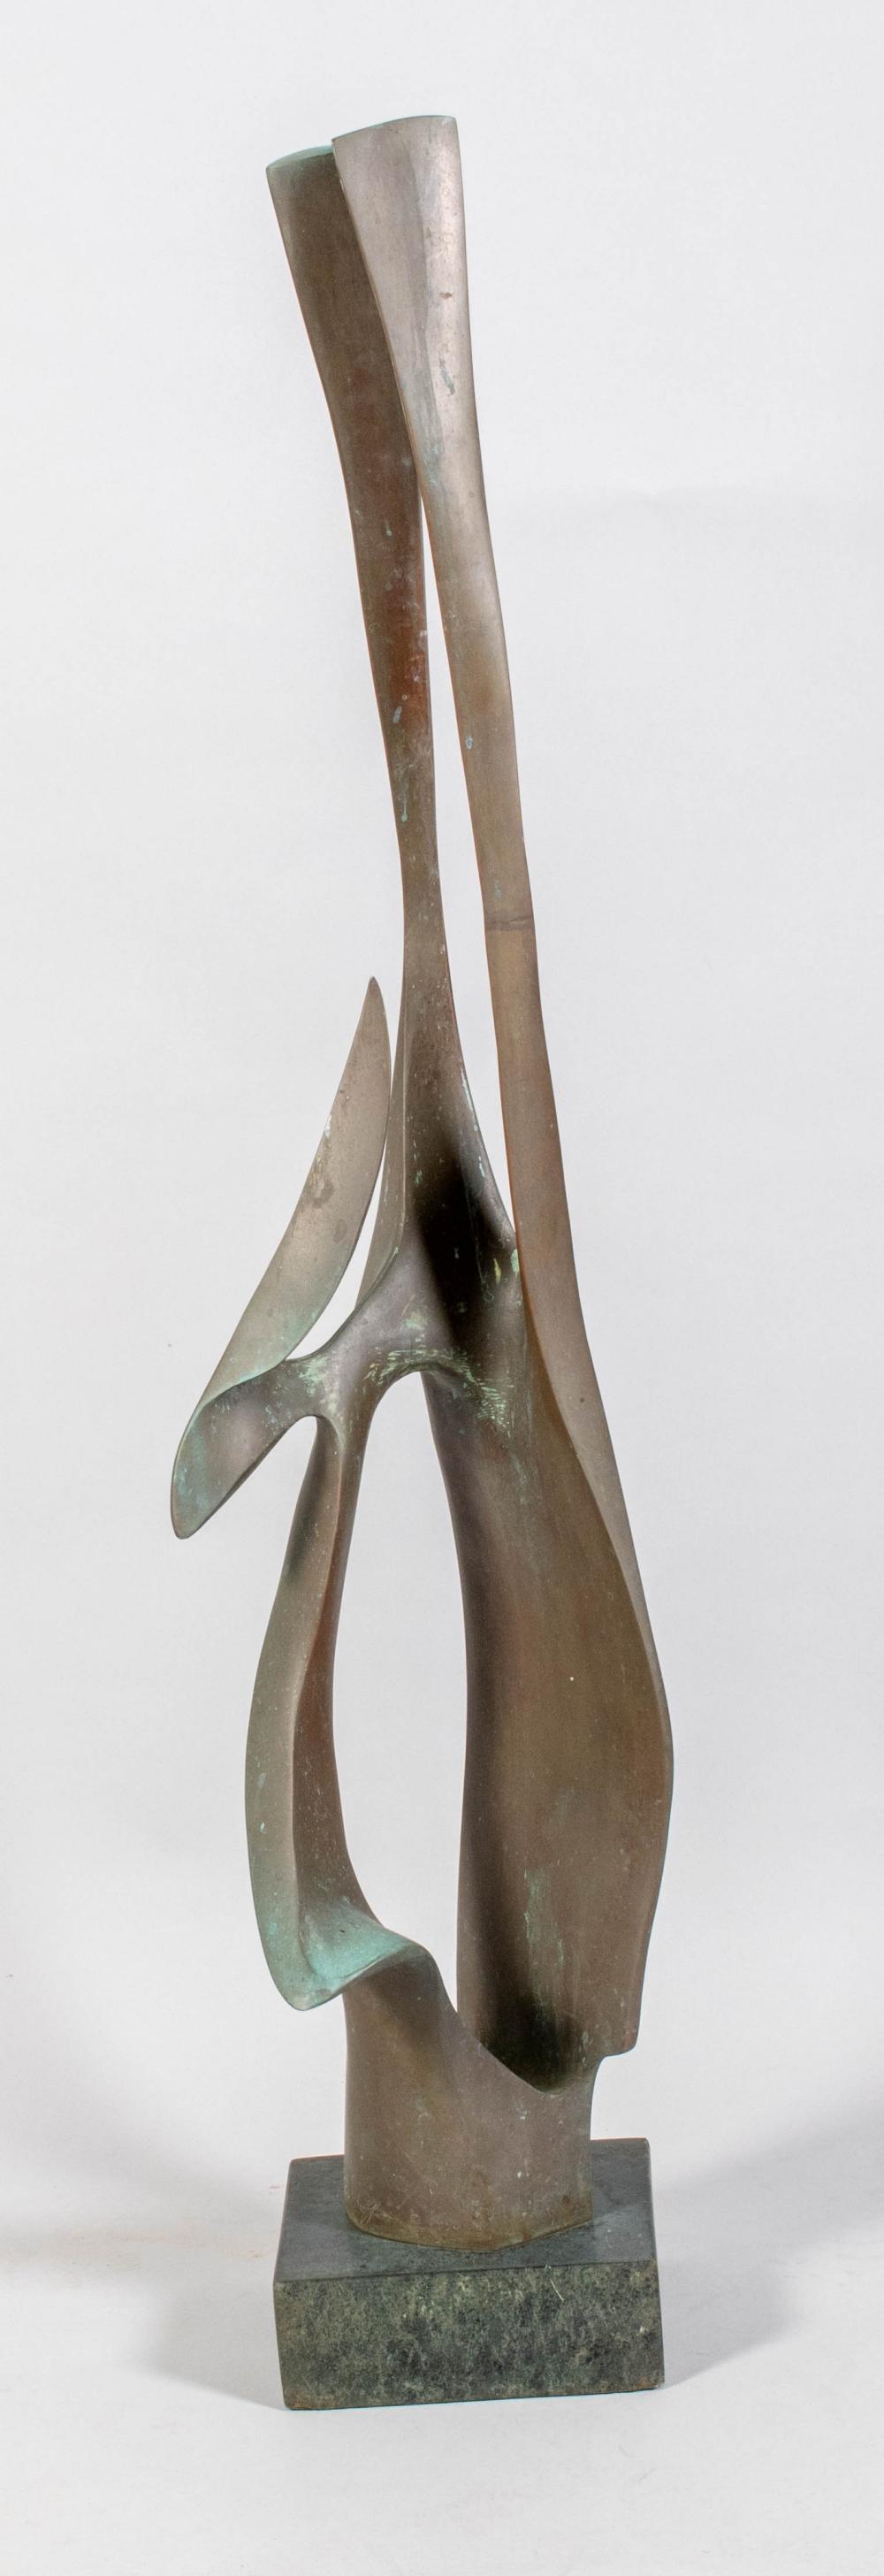 ABSTRACT METAL SCULPTURE, DATED